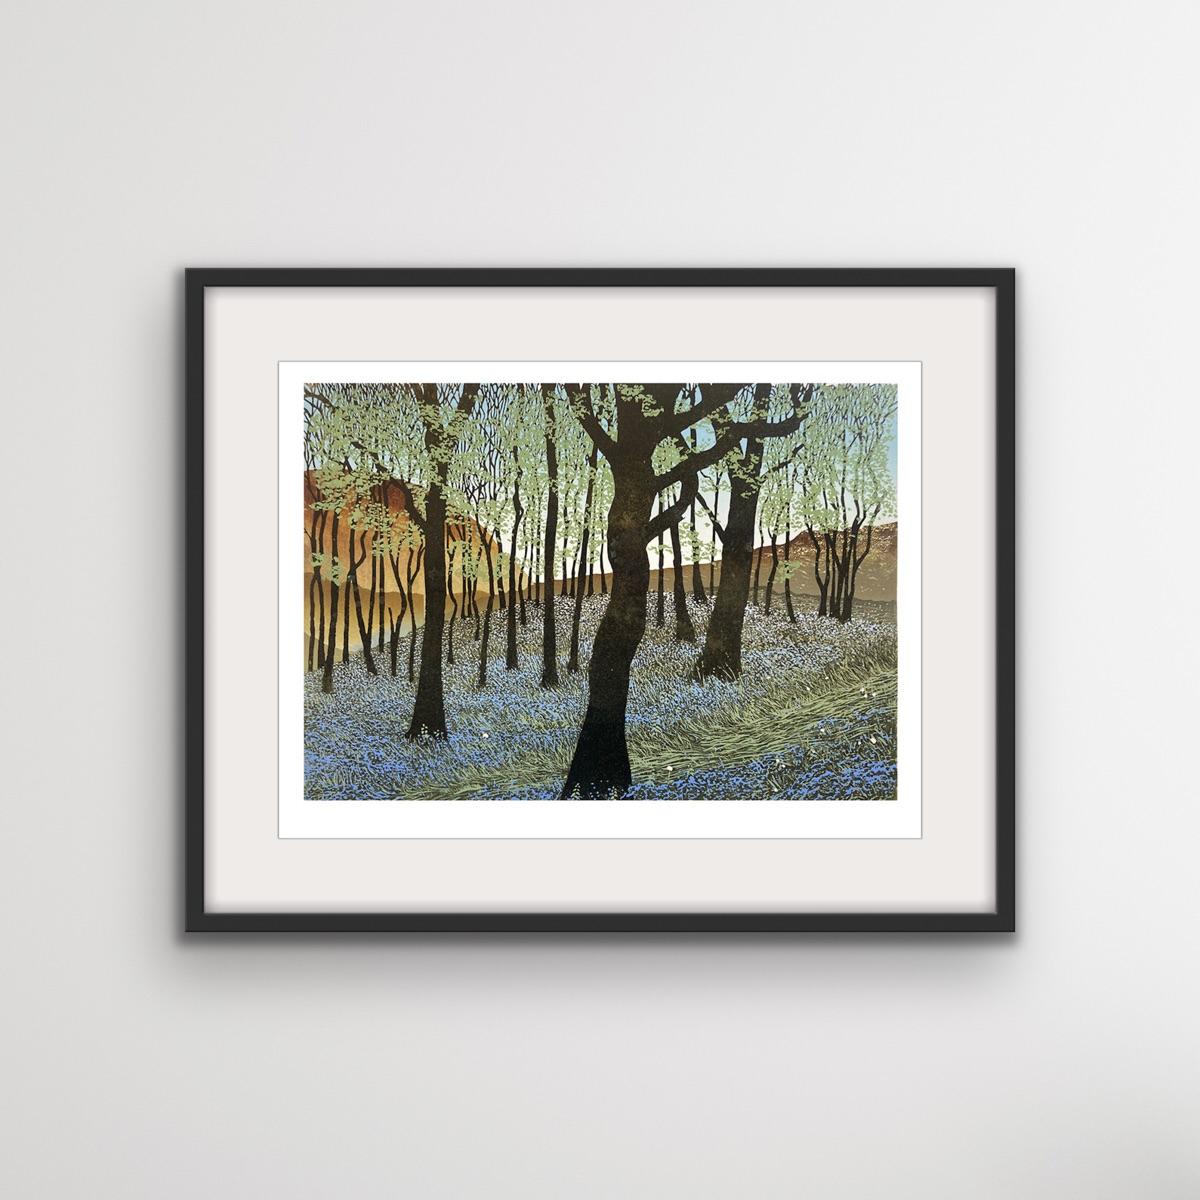 Memory of Spring, Limited Edition print, Welsh bluebell wood, Contemporary art - Gray Figurative Print by Ian Phillips